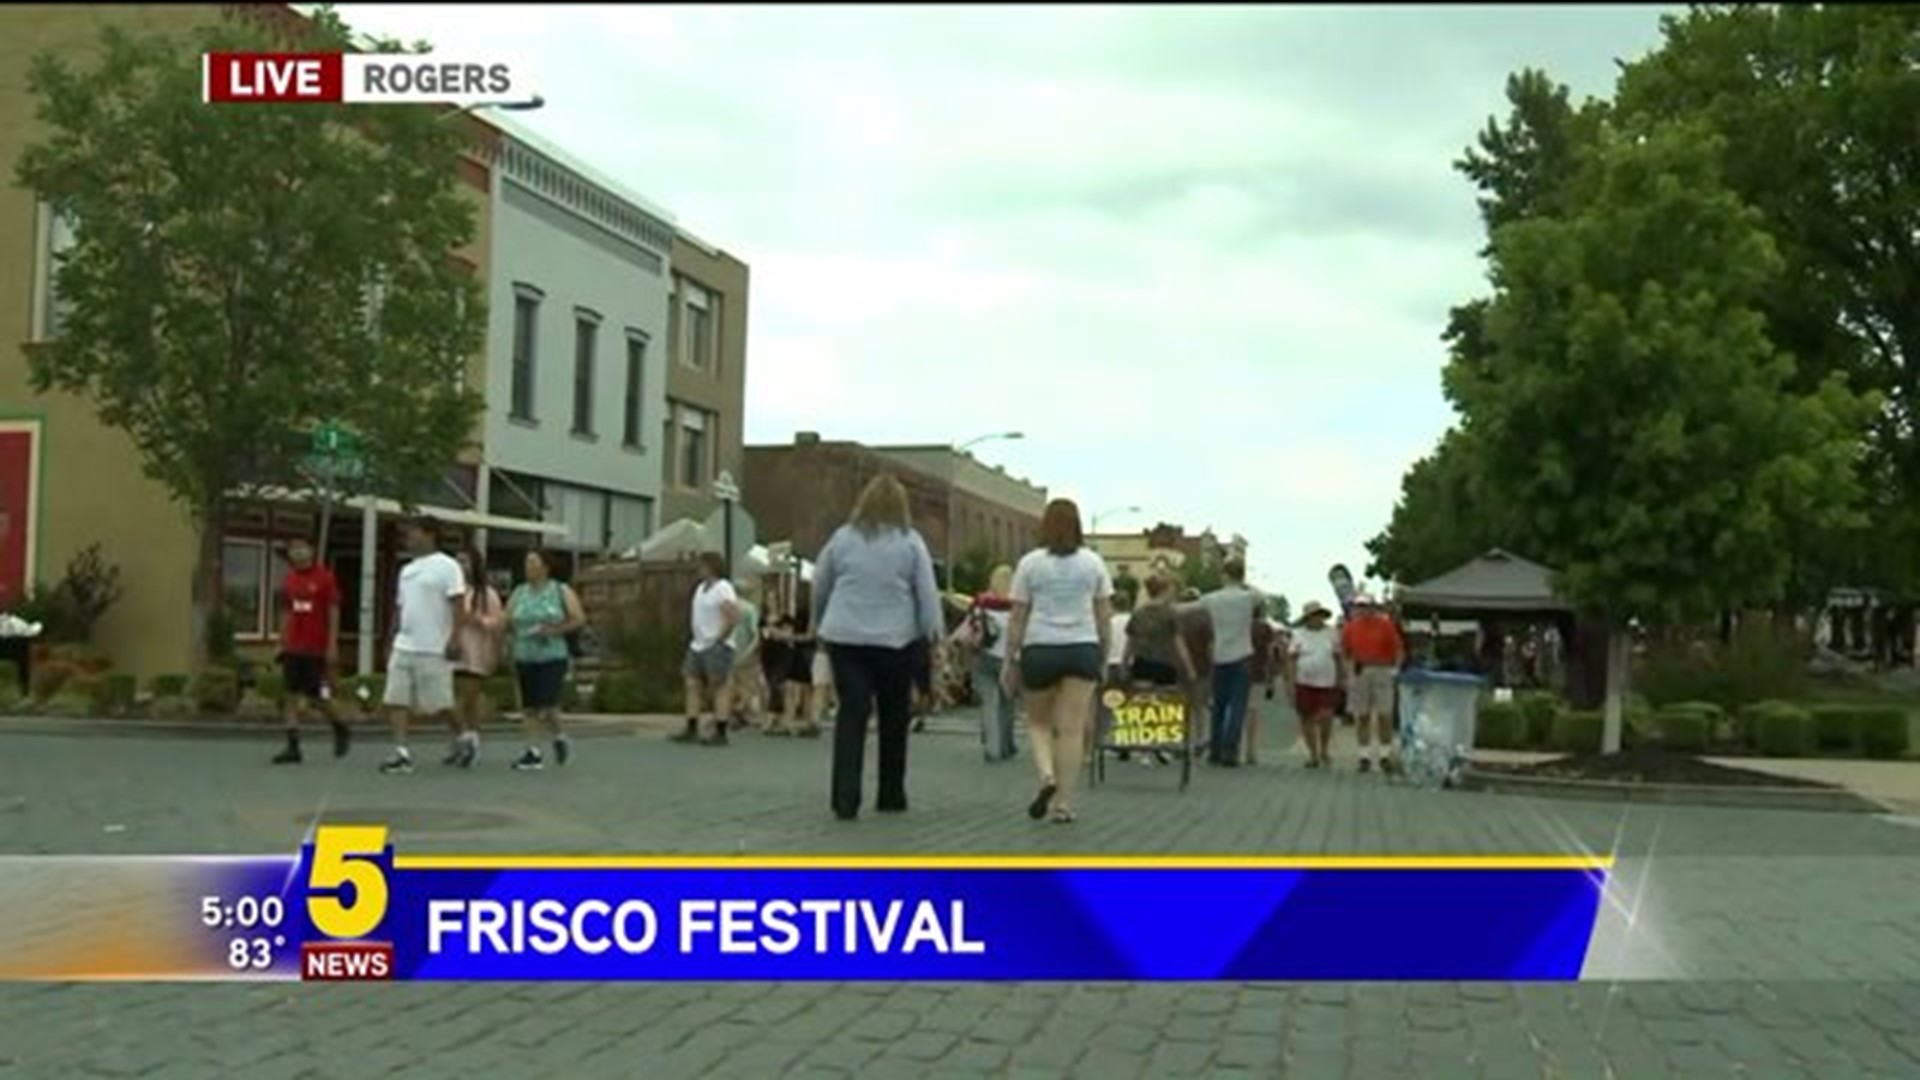 Frisco Festival In Downtown Rogers